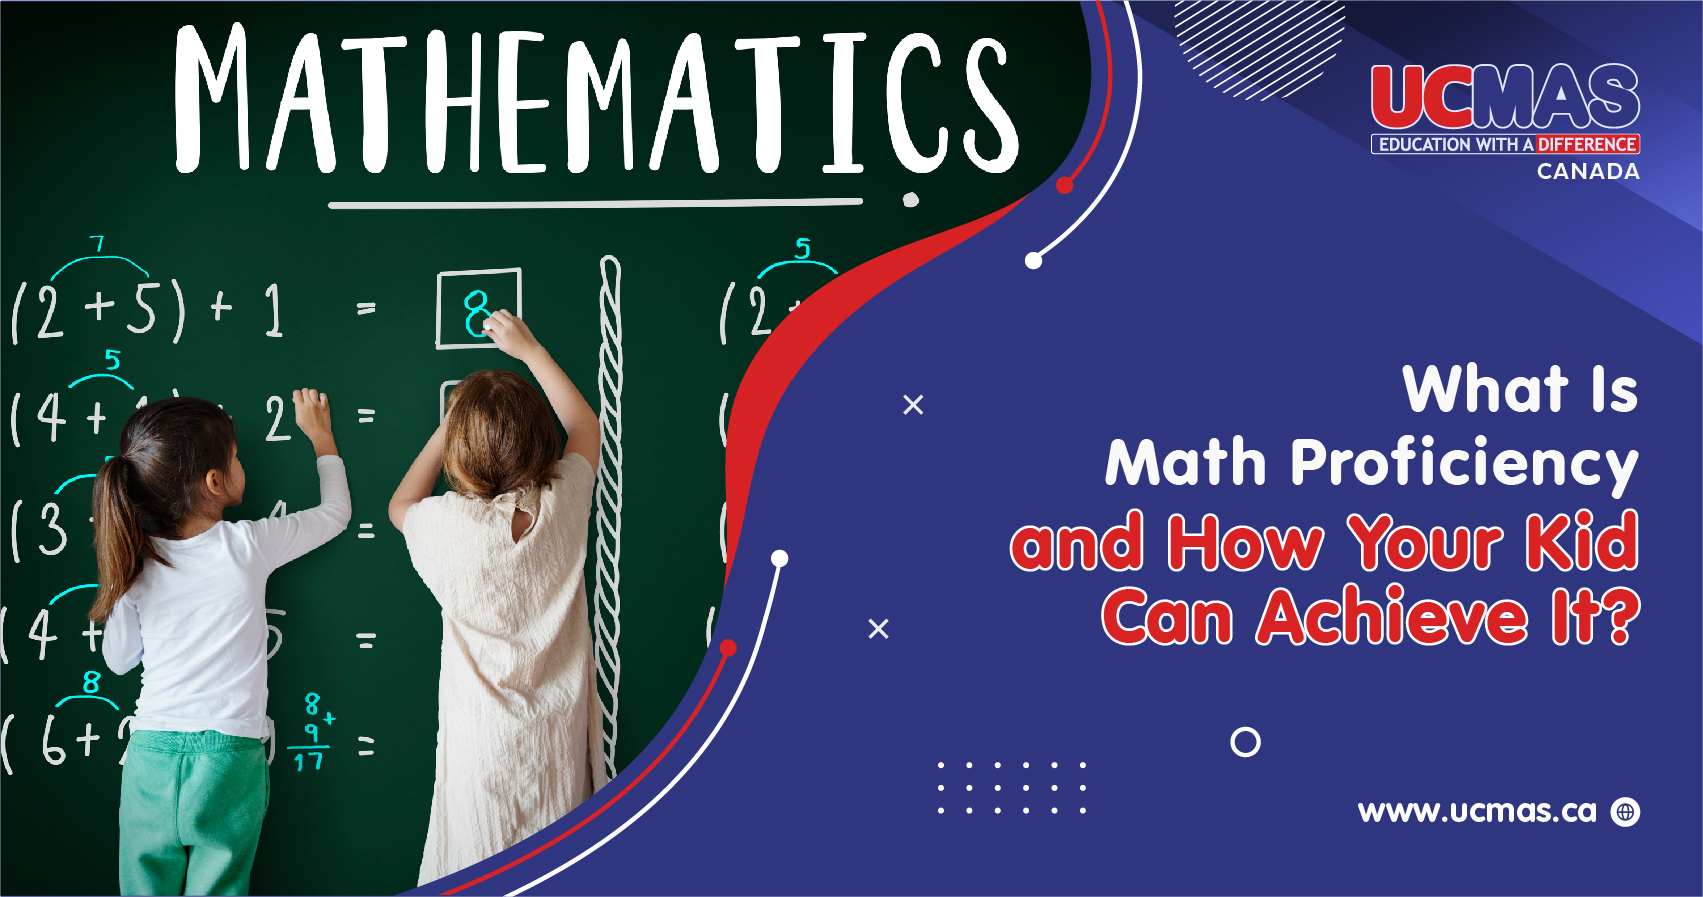 What Is Math Proficiency and How Your Kid Can Achieve It with Mental Abacus Math!